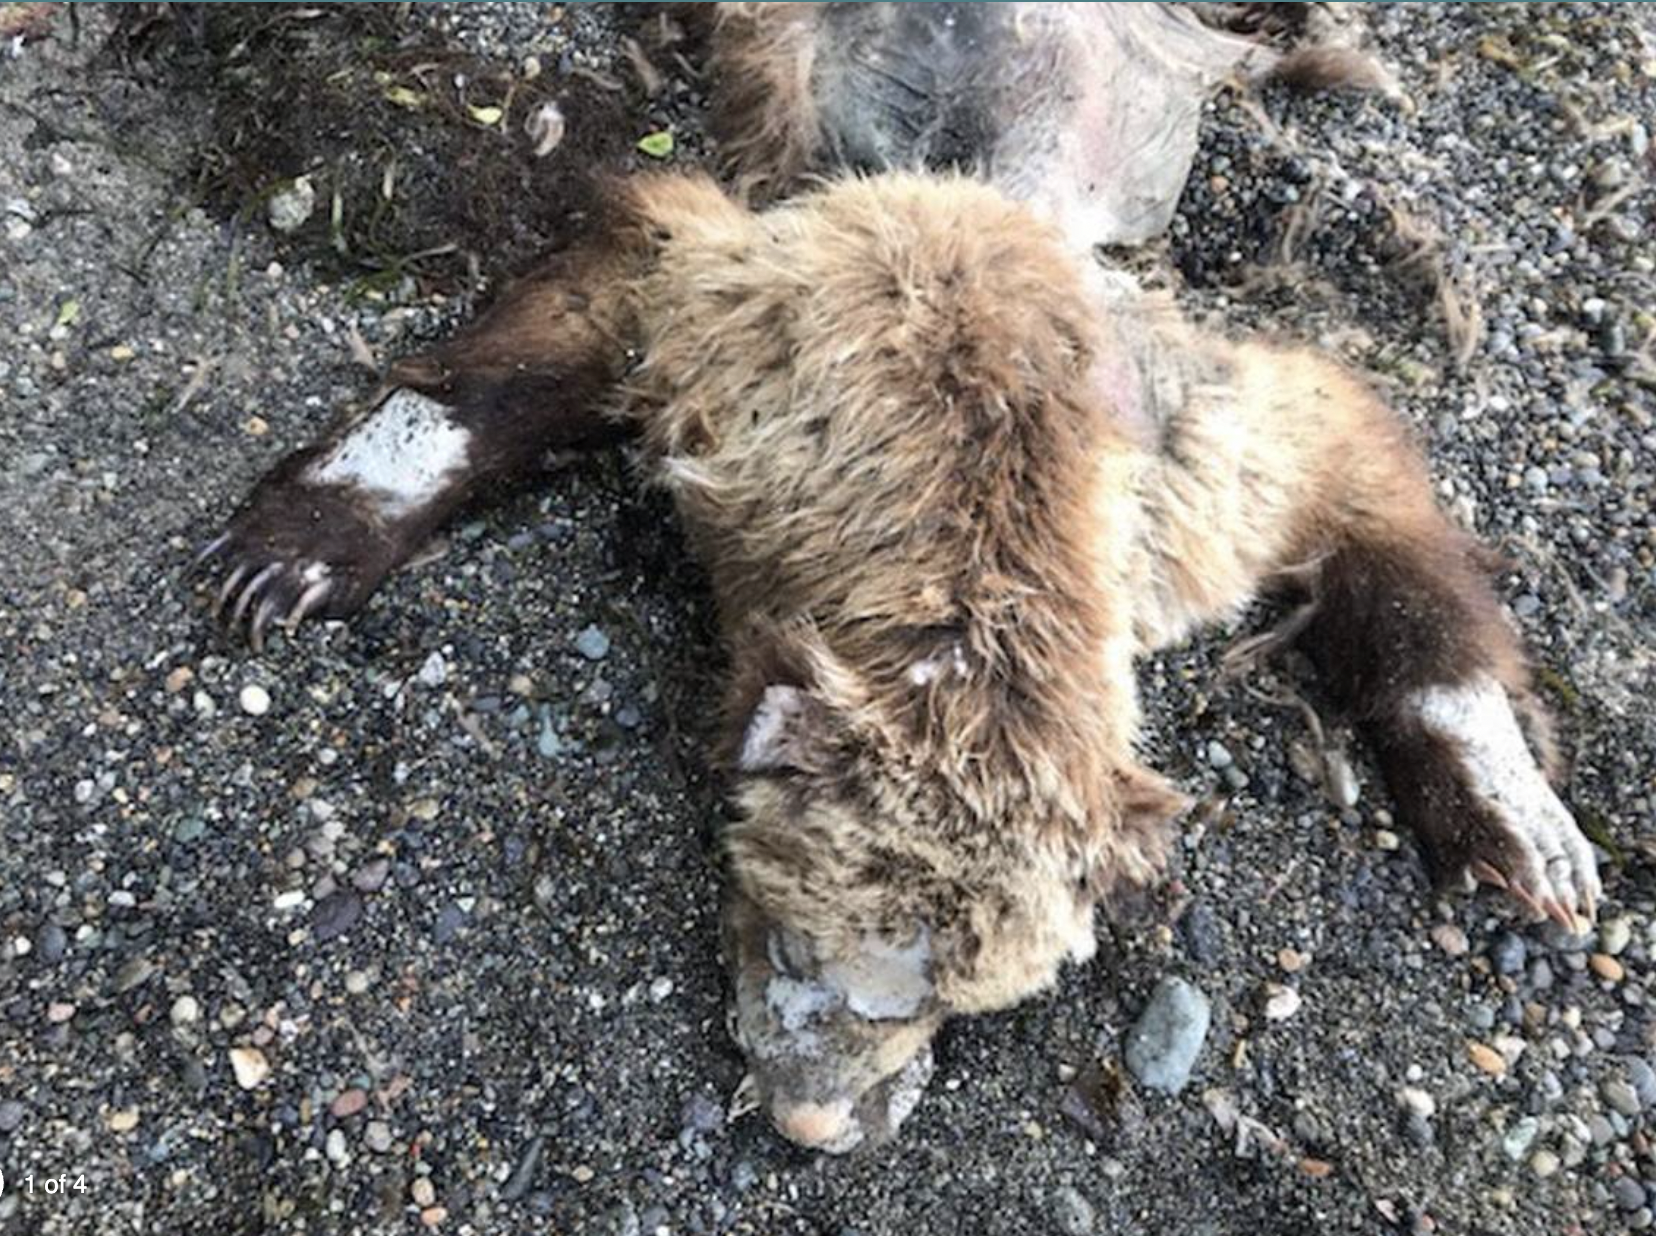 Dead Grizzly Mysteriously Washes Ashore on Washington State Beach